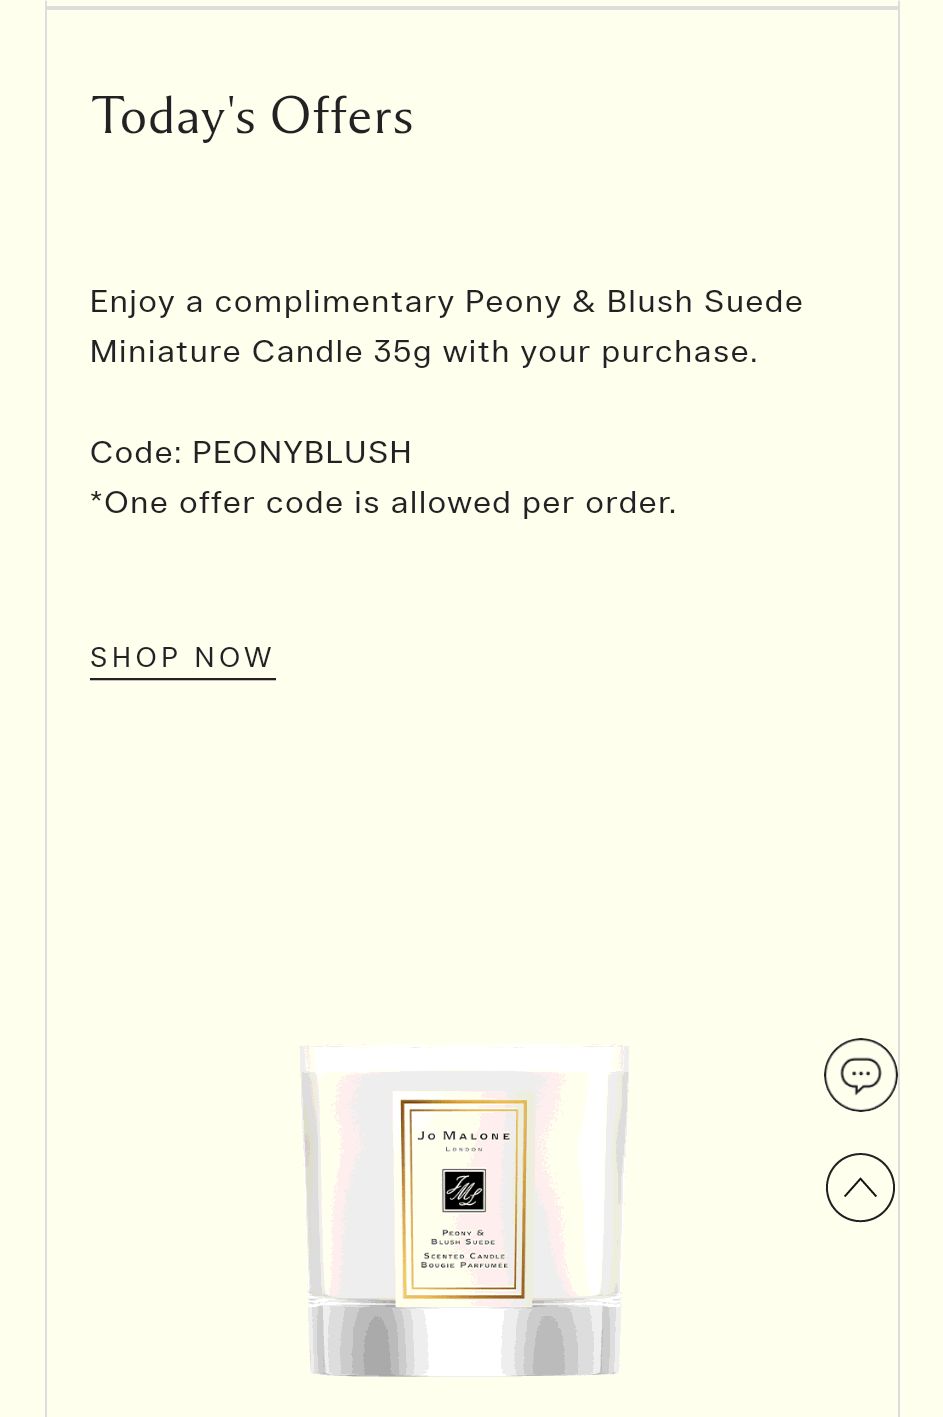 Jo Malone London Enjoy a complimentary Peony & Blush Suede Miniature Candle 35g with your purchase.  Code: PEONYBLUSH